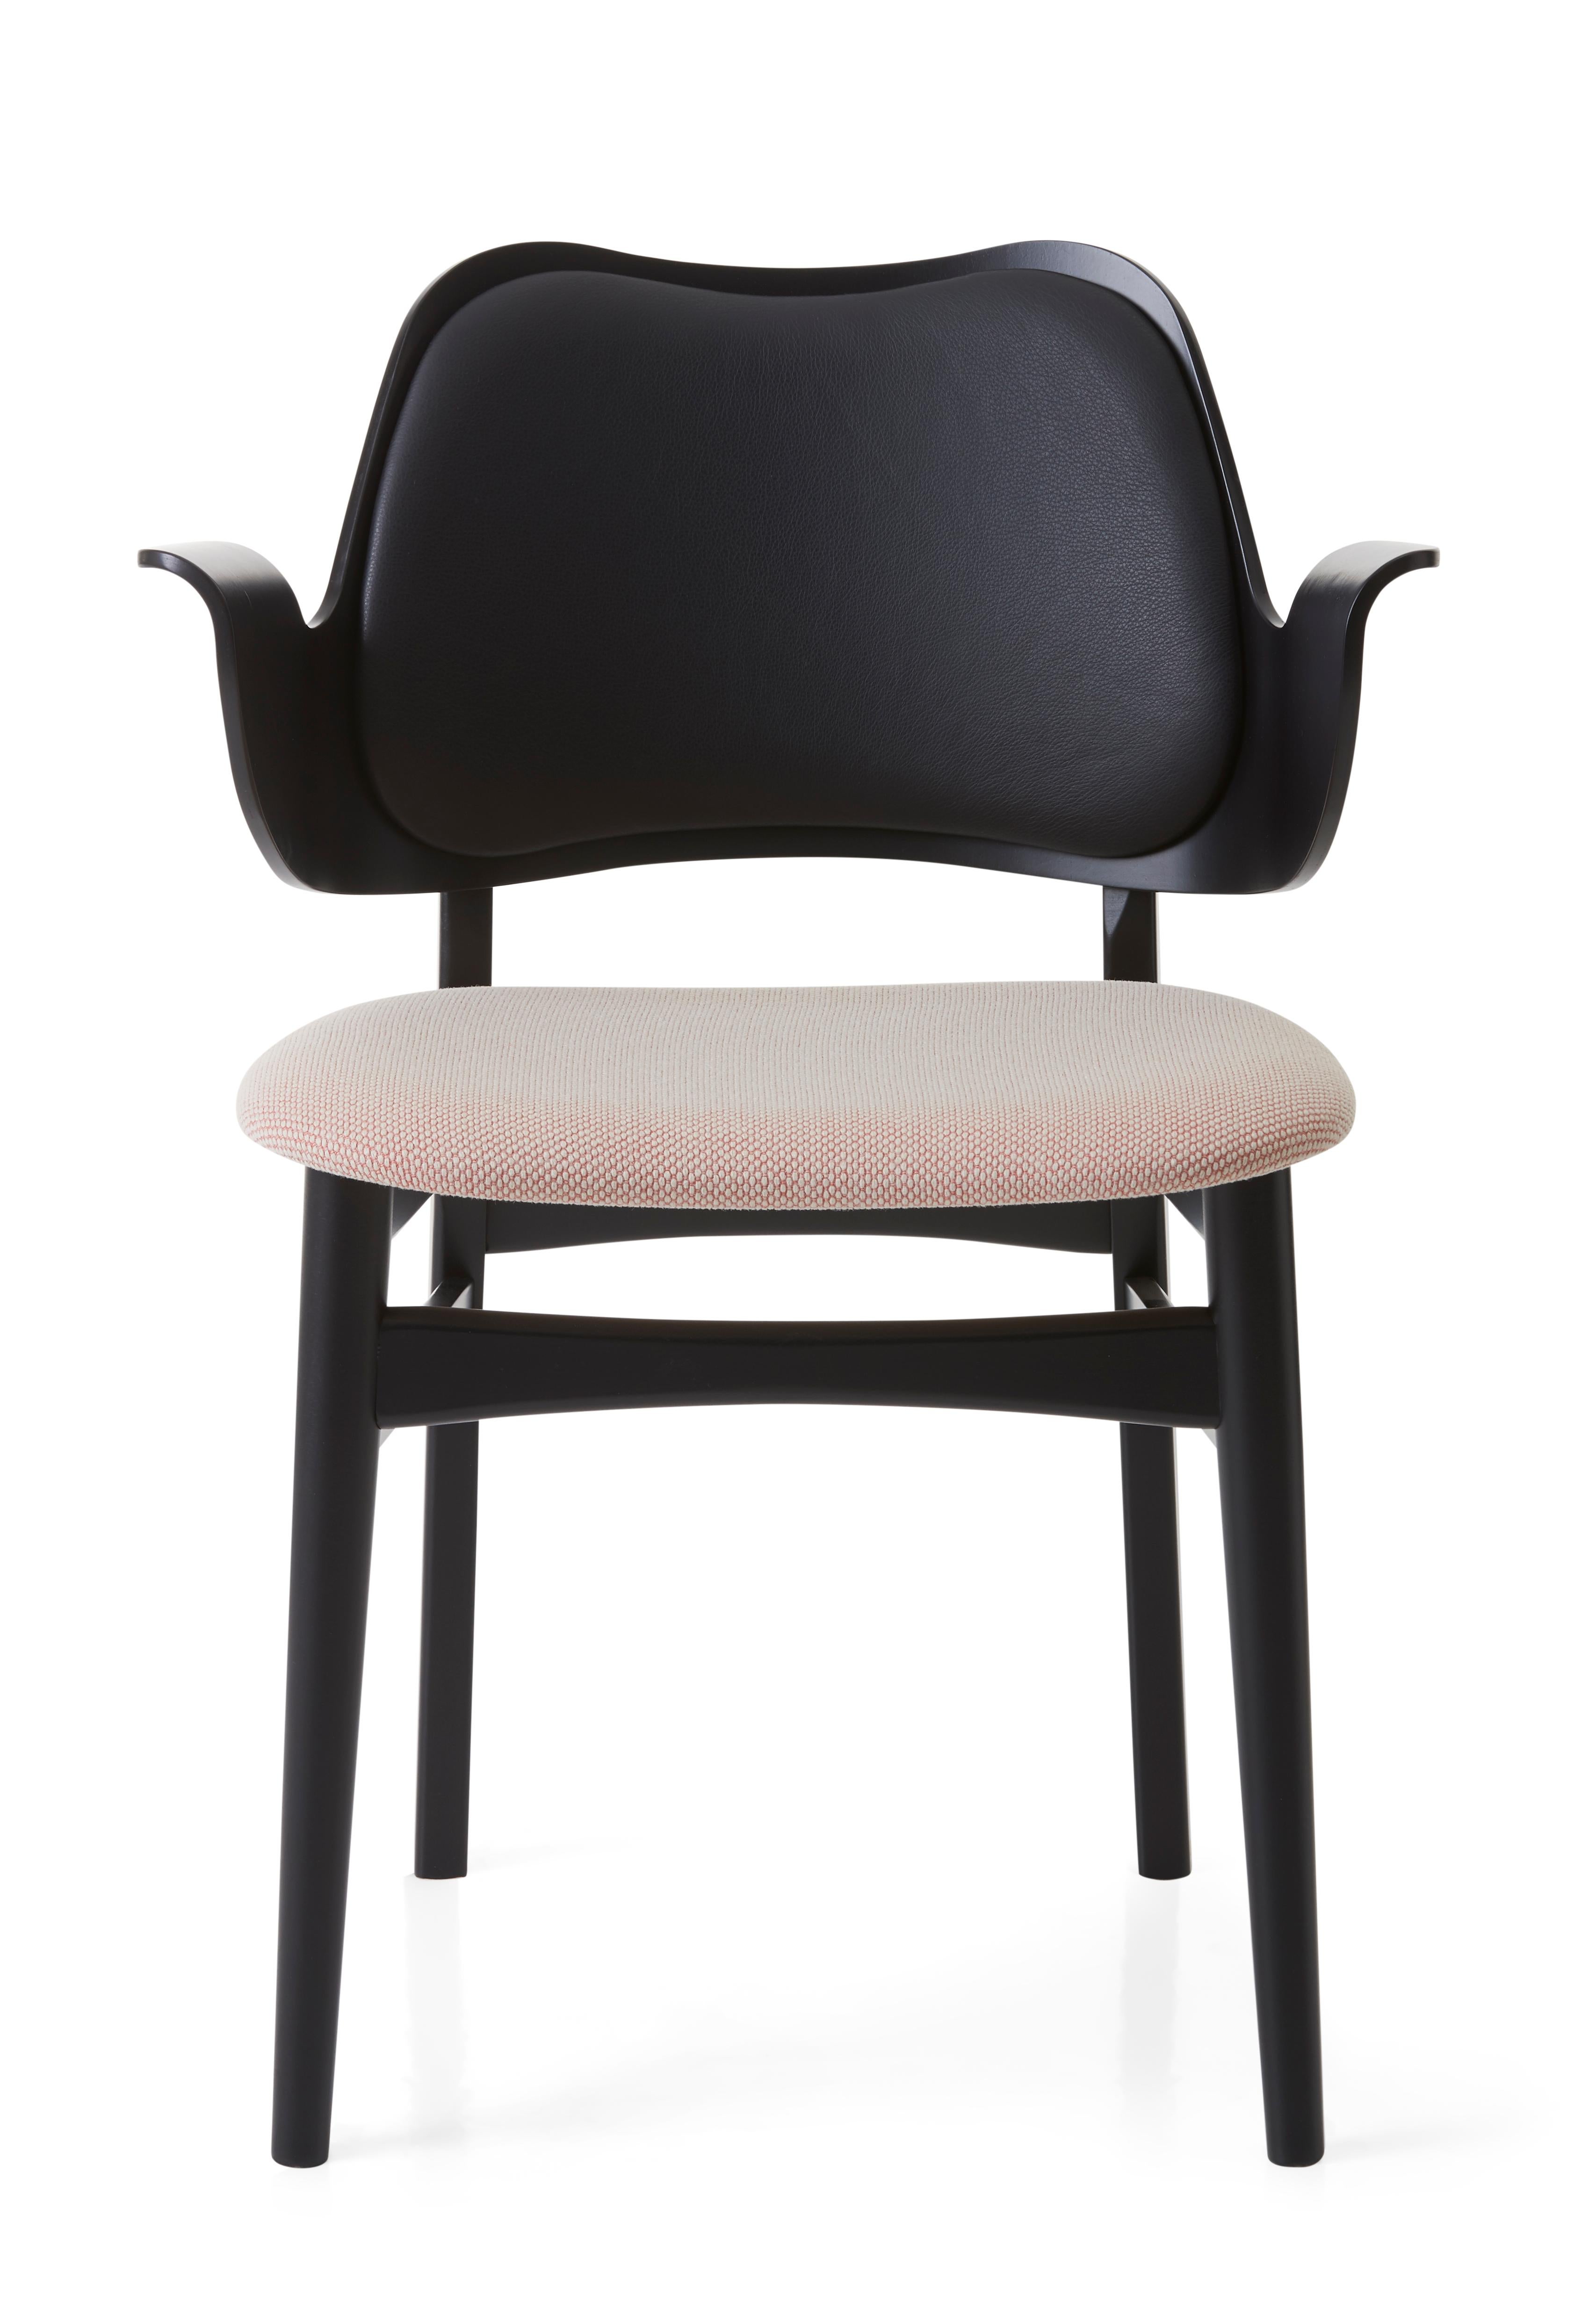 For Sale: Pink (Pres207,Merit034) Gesture Two-Tone Fully Upholstered Chair in Black, by Hans Olsen for Warm Nordic